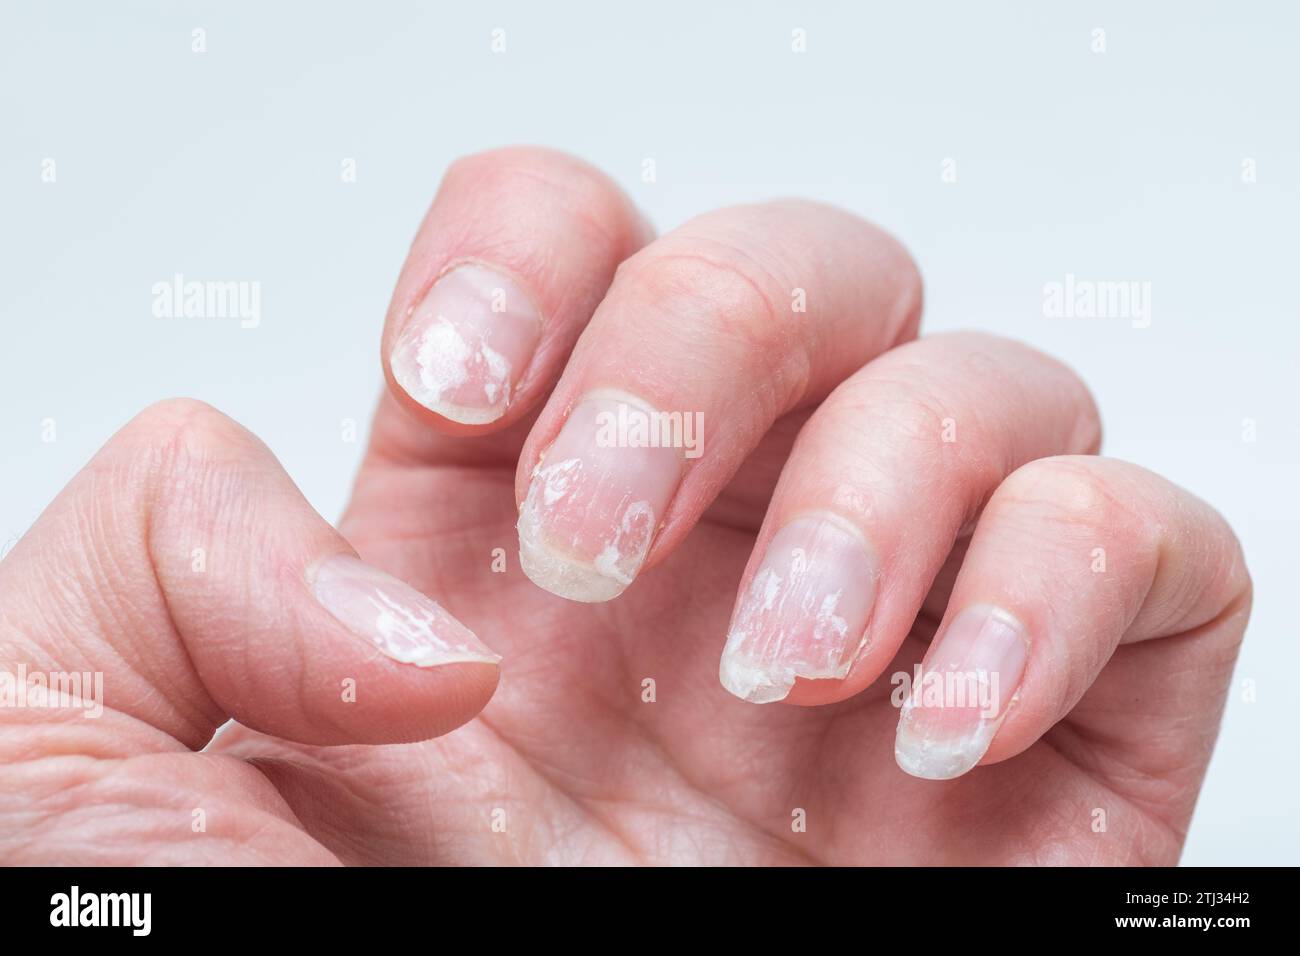 What can you do about yellow nails? | Ohio State Medical Center